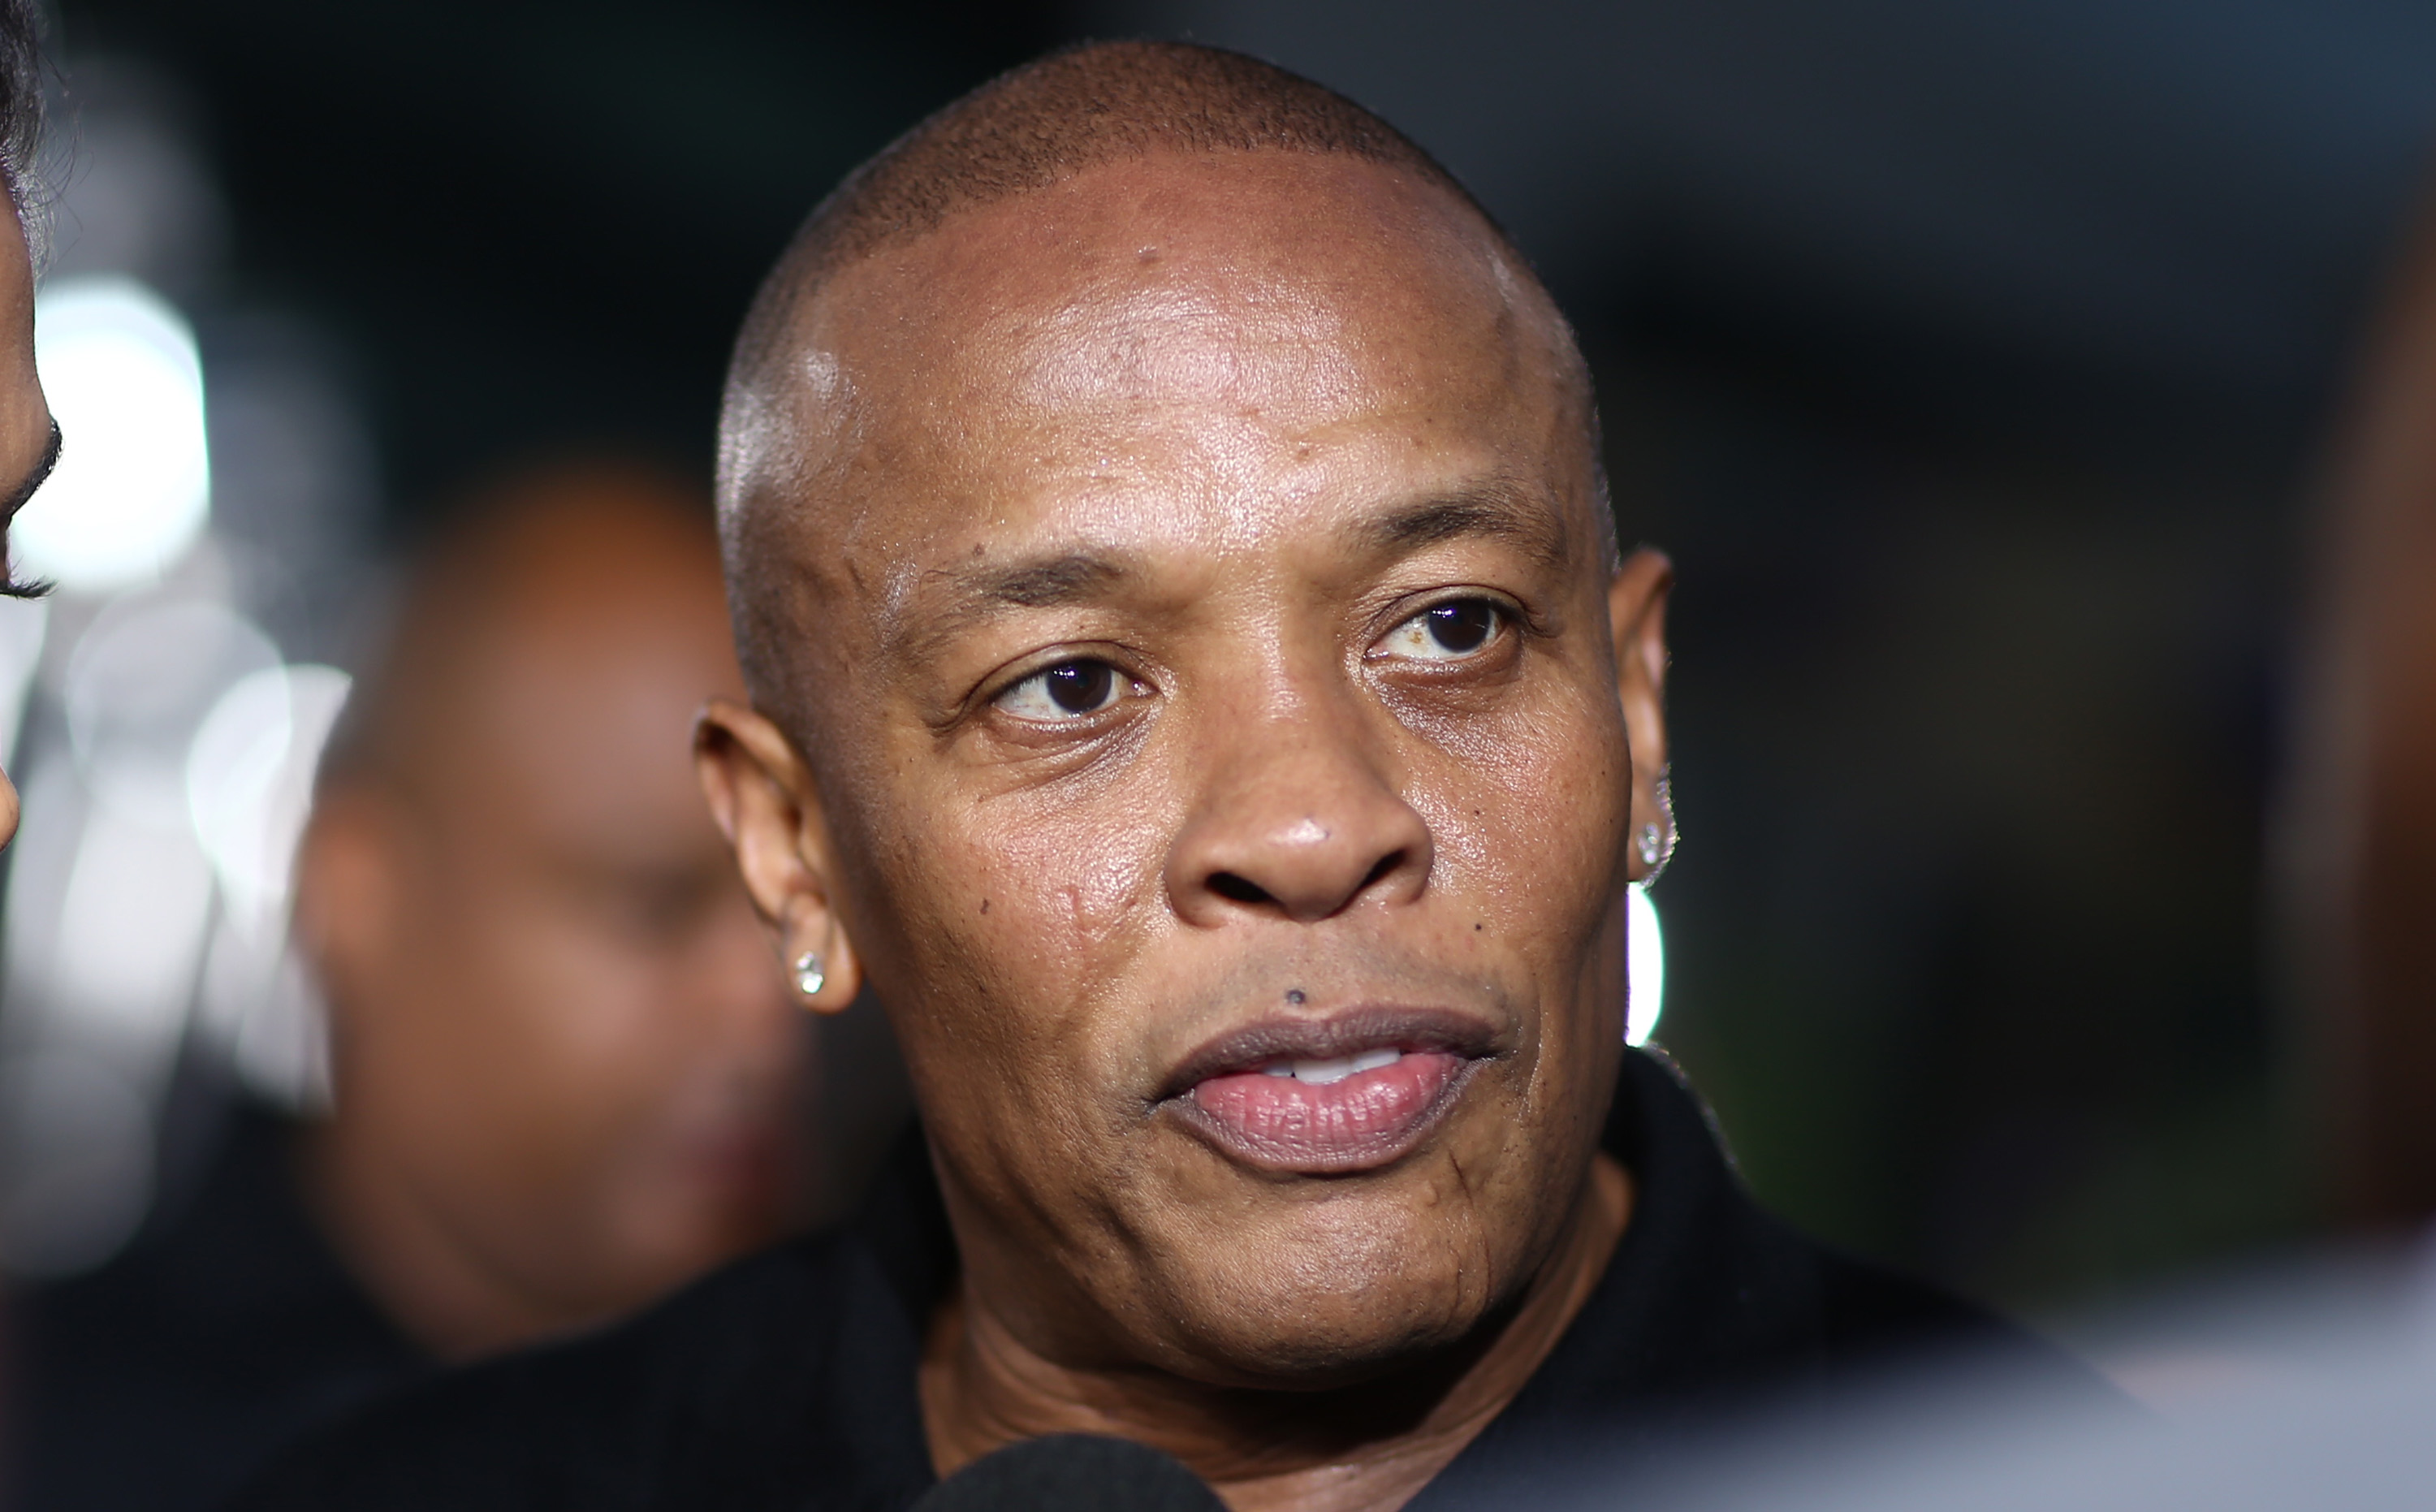 Dr. Dre arrives at the Los Angeles premiere of <i>Straight Outta Compton</i> at the Microsoft Theater on Aug. 10, 2015 (John Salangsang—Invision/AP)